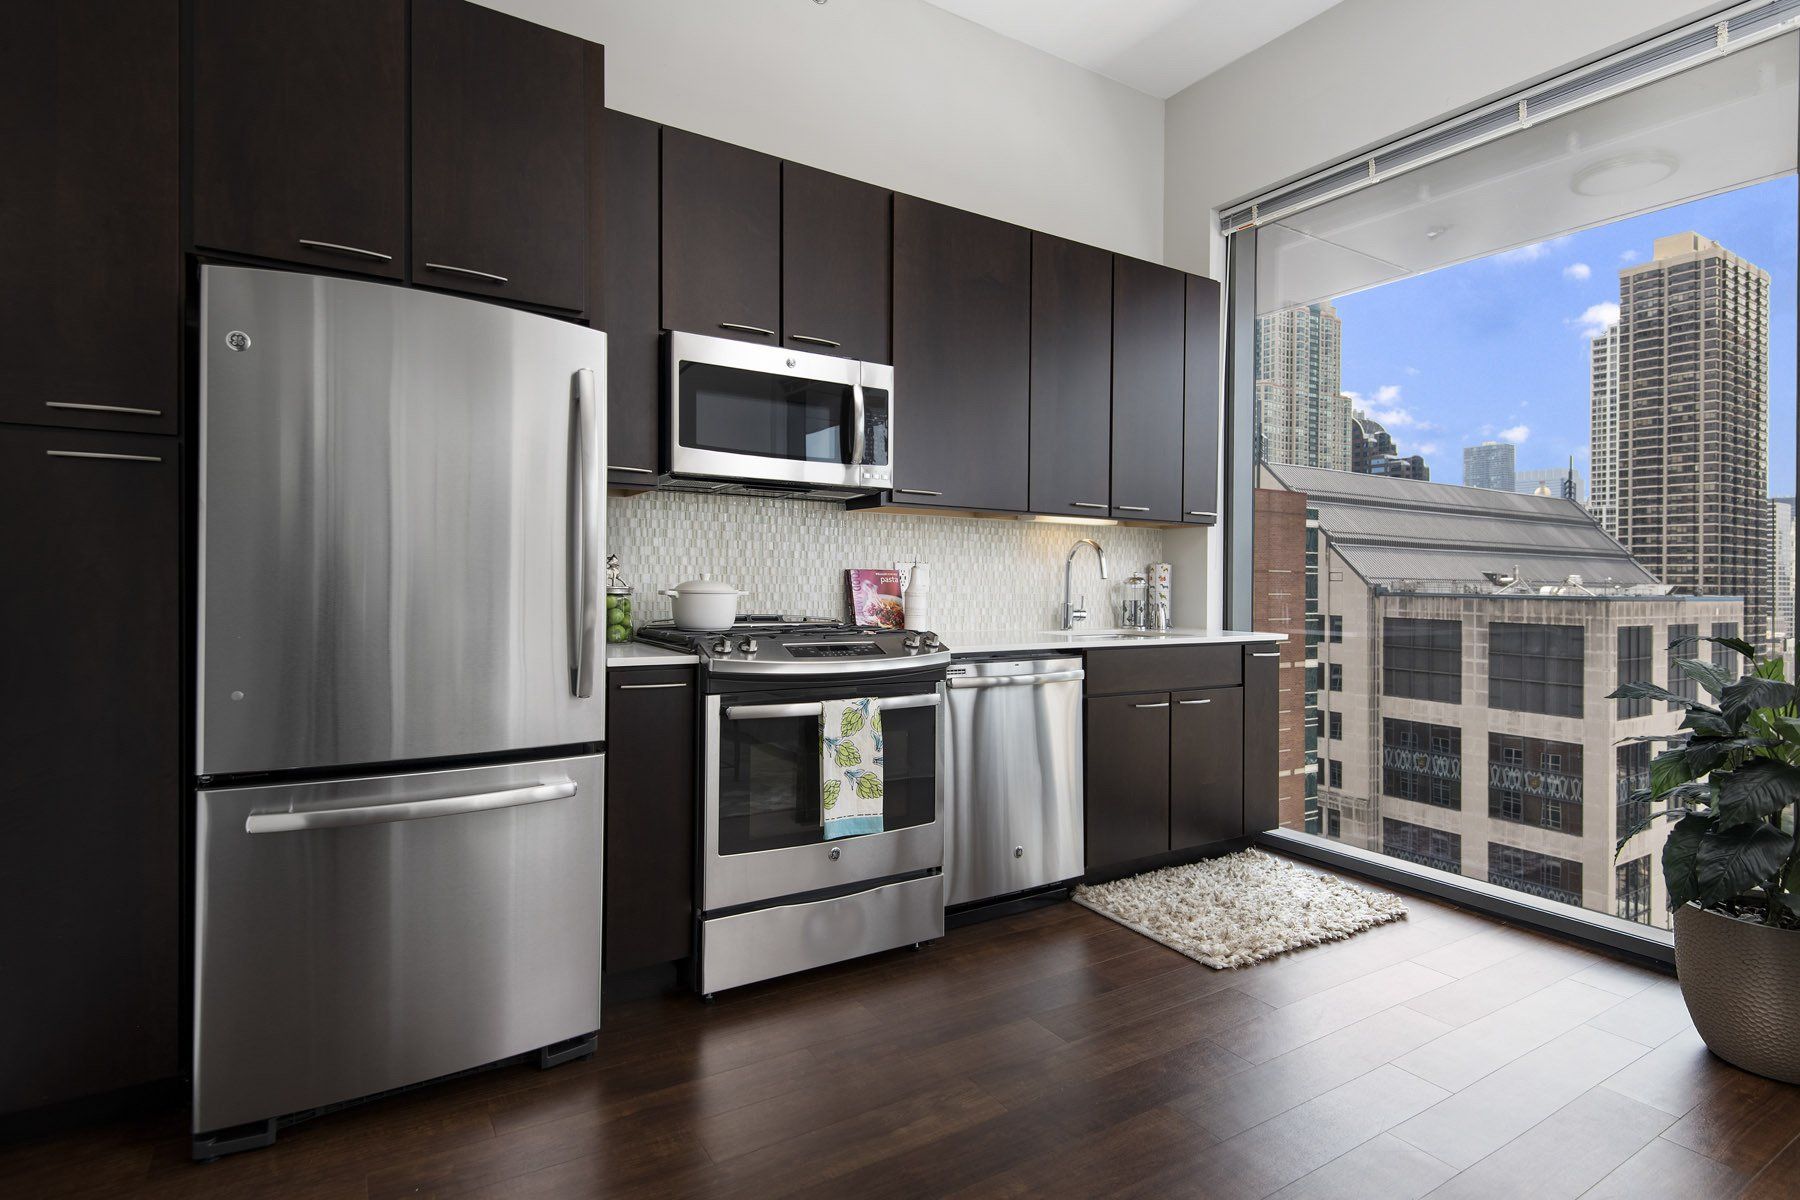 A kitchen with stainless steel appliances and brown cabinets at State & Chestnut.